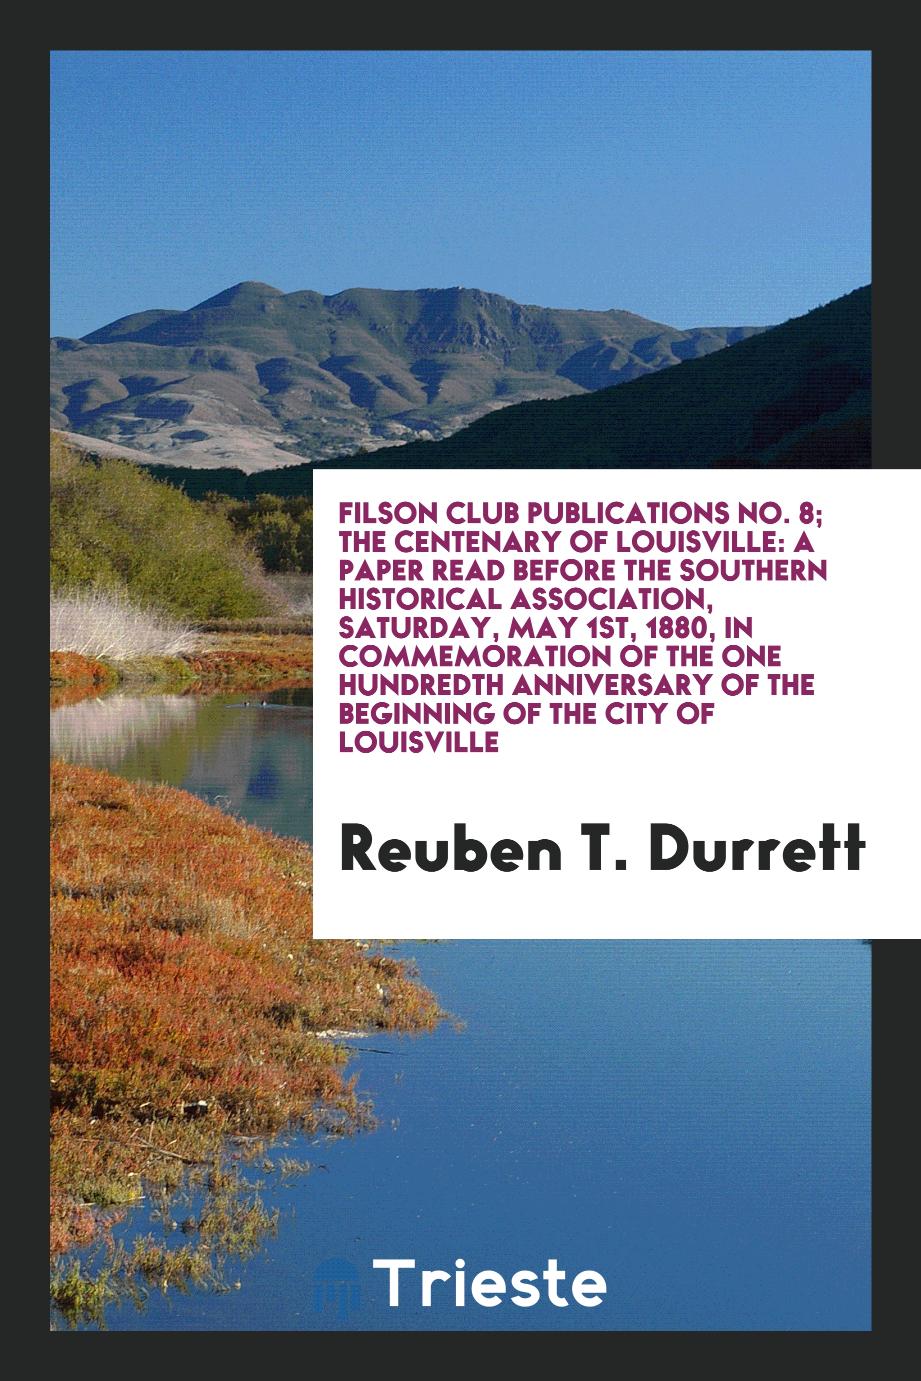 Reuben T. Durrett - Filson Club Publications No. 8; The Centenary of Louisville: A Paper Read Before the Southern Historical Association, Saturday, May 1st, 1880, in Commemoration of the One Hundredth Anniversary of the Beginning of the City of Louisville